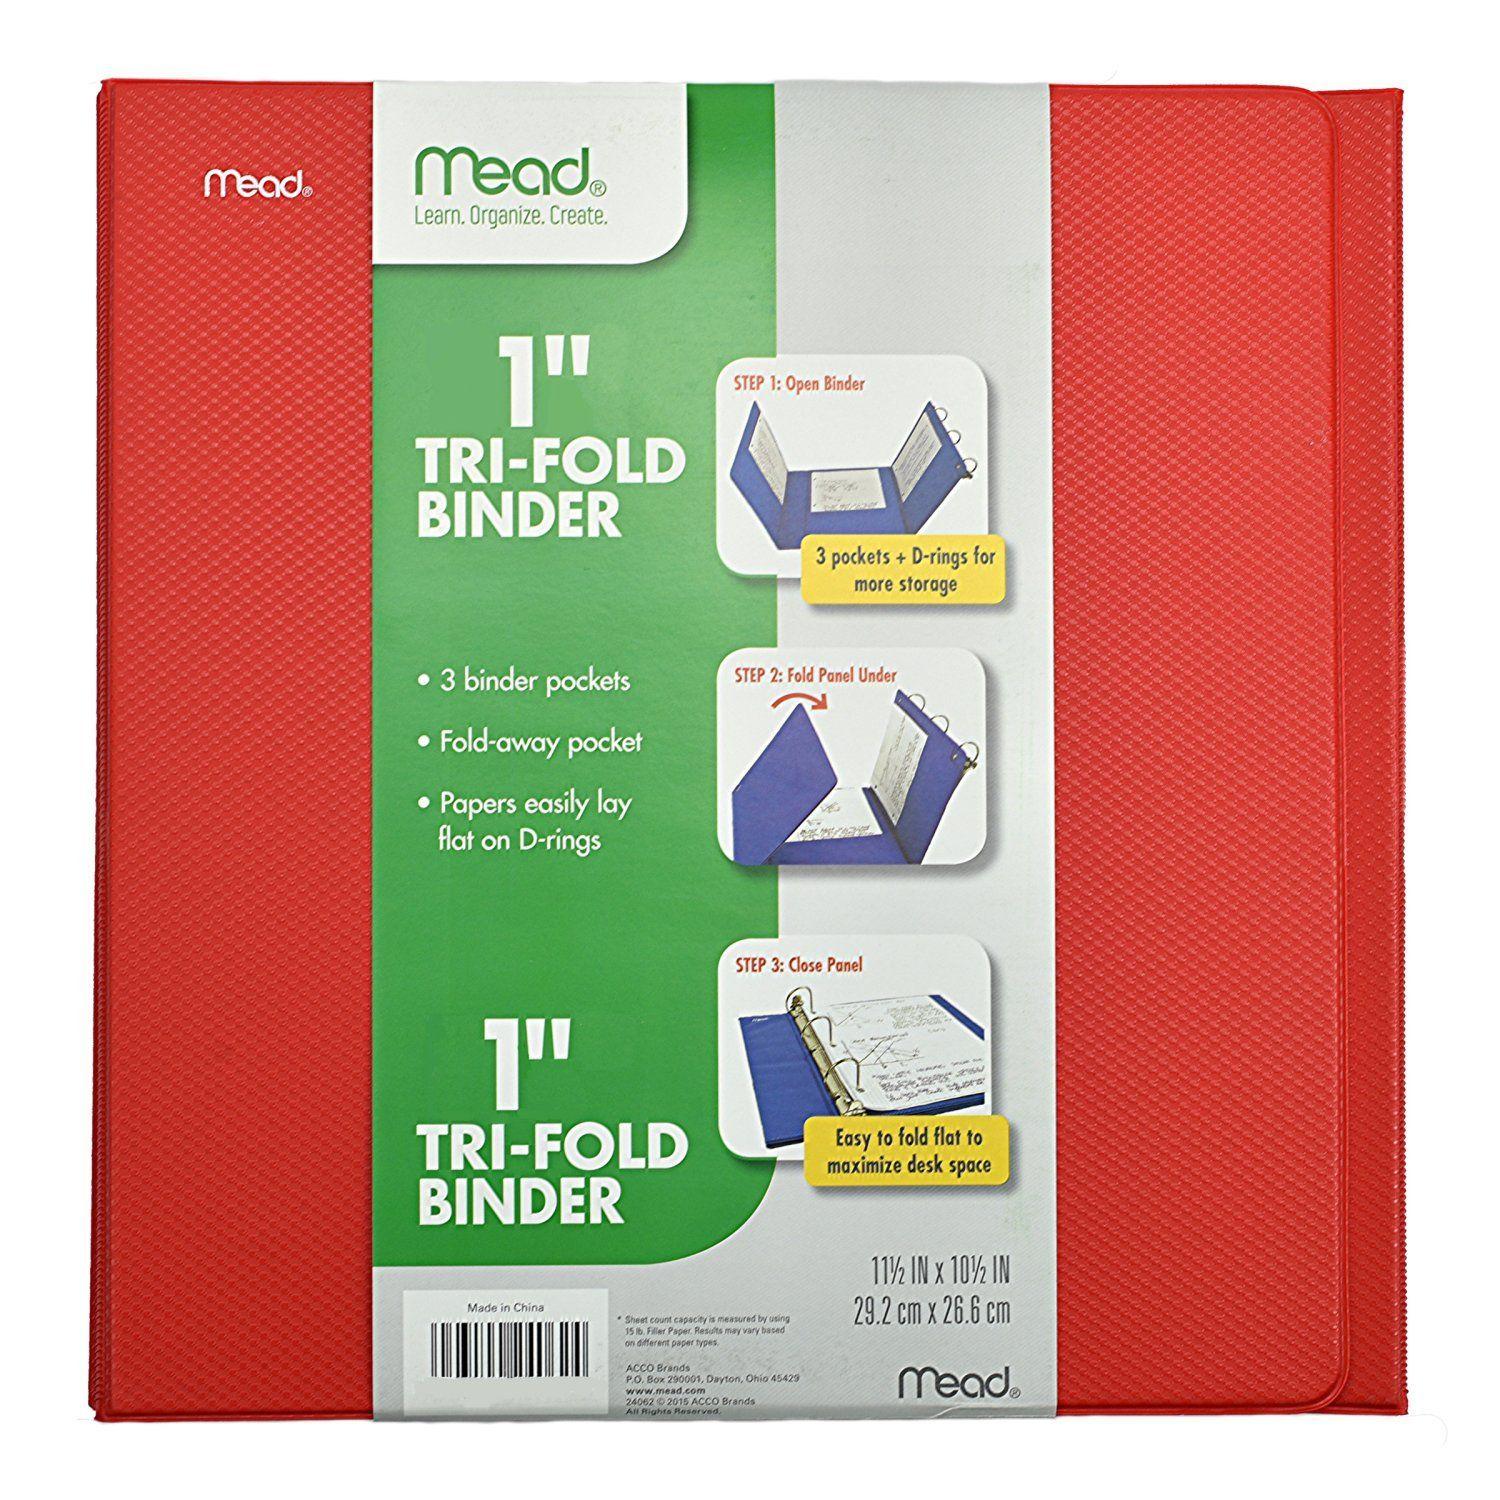 Three Red Rings Logo - Amazon.com : Mead 1 Inch 3 Ring Binder, Tri Fold, Red 38864